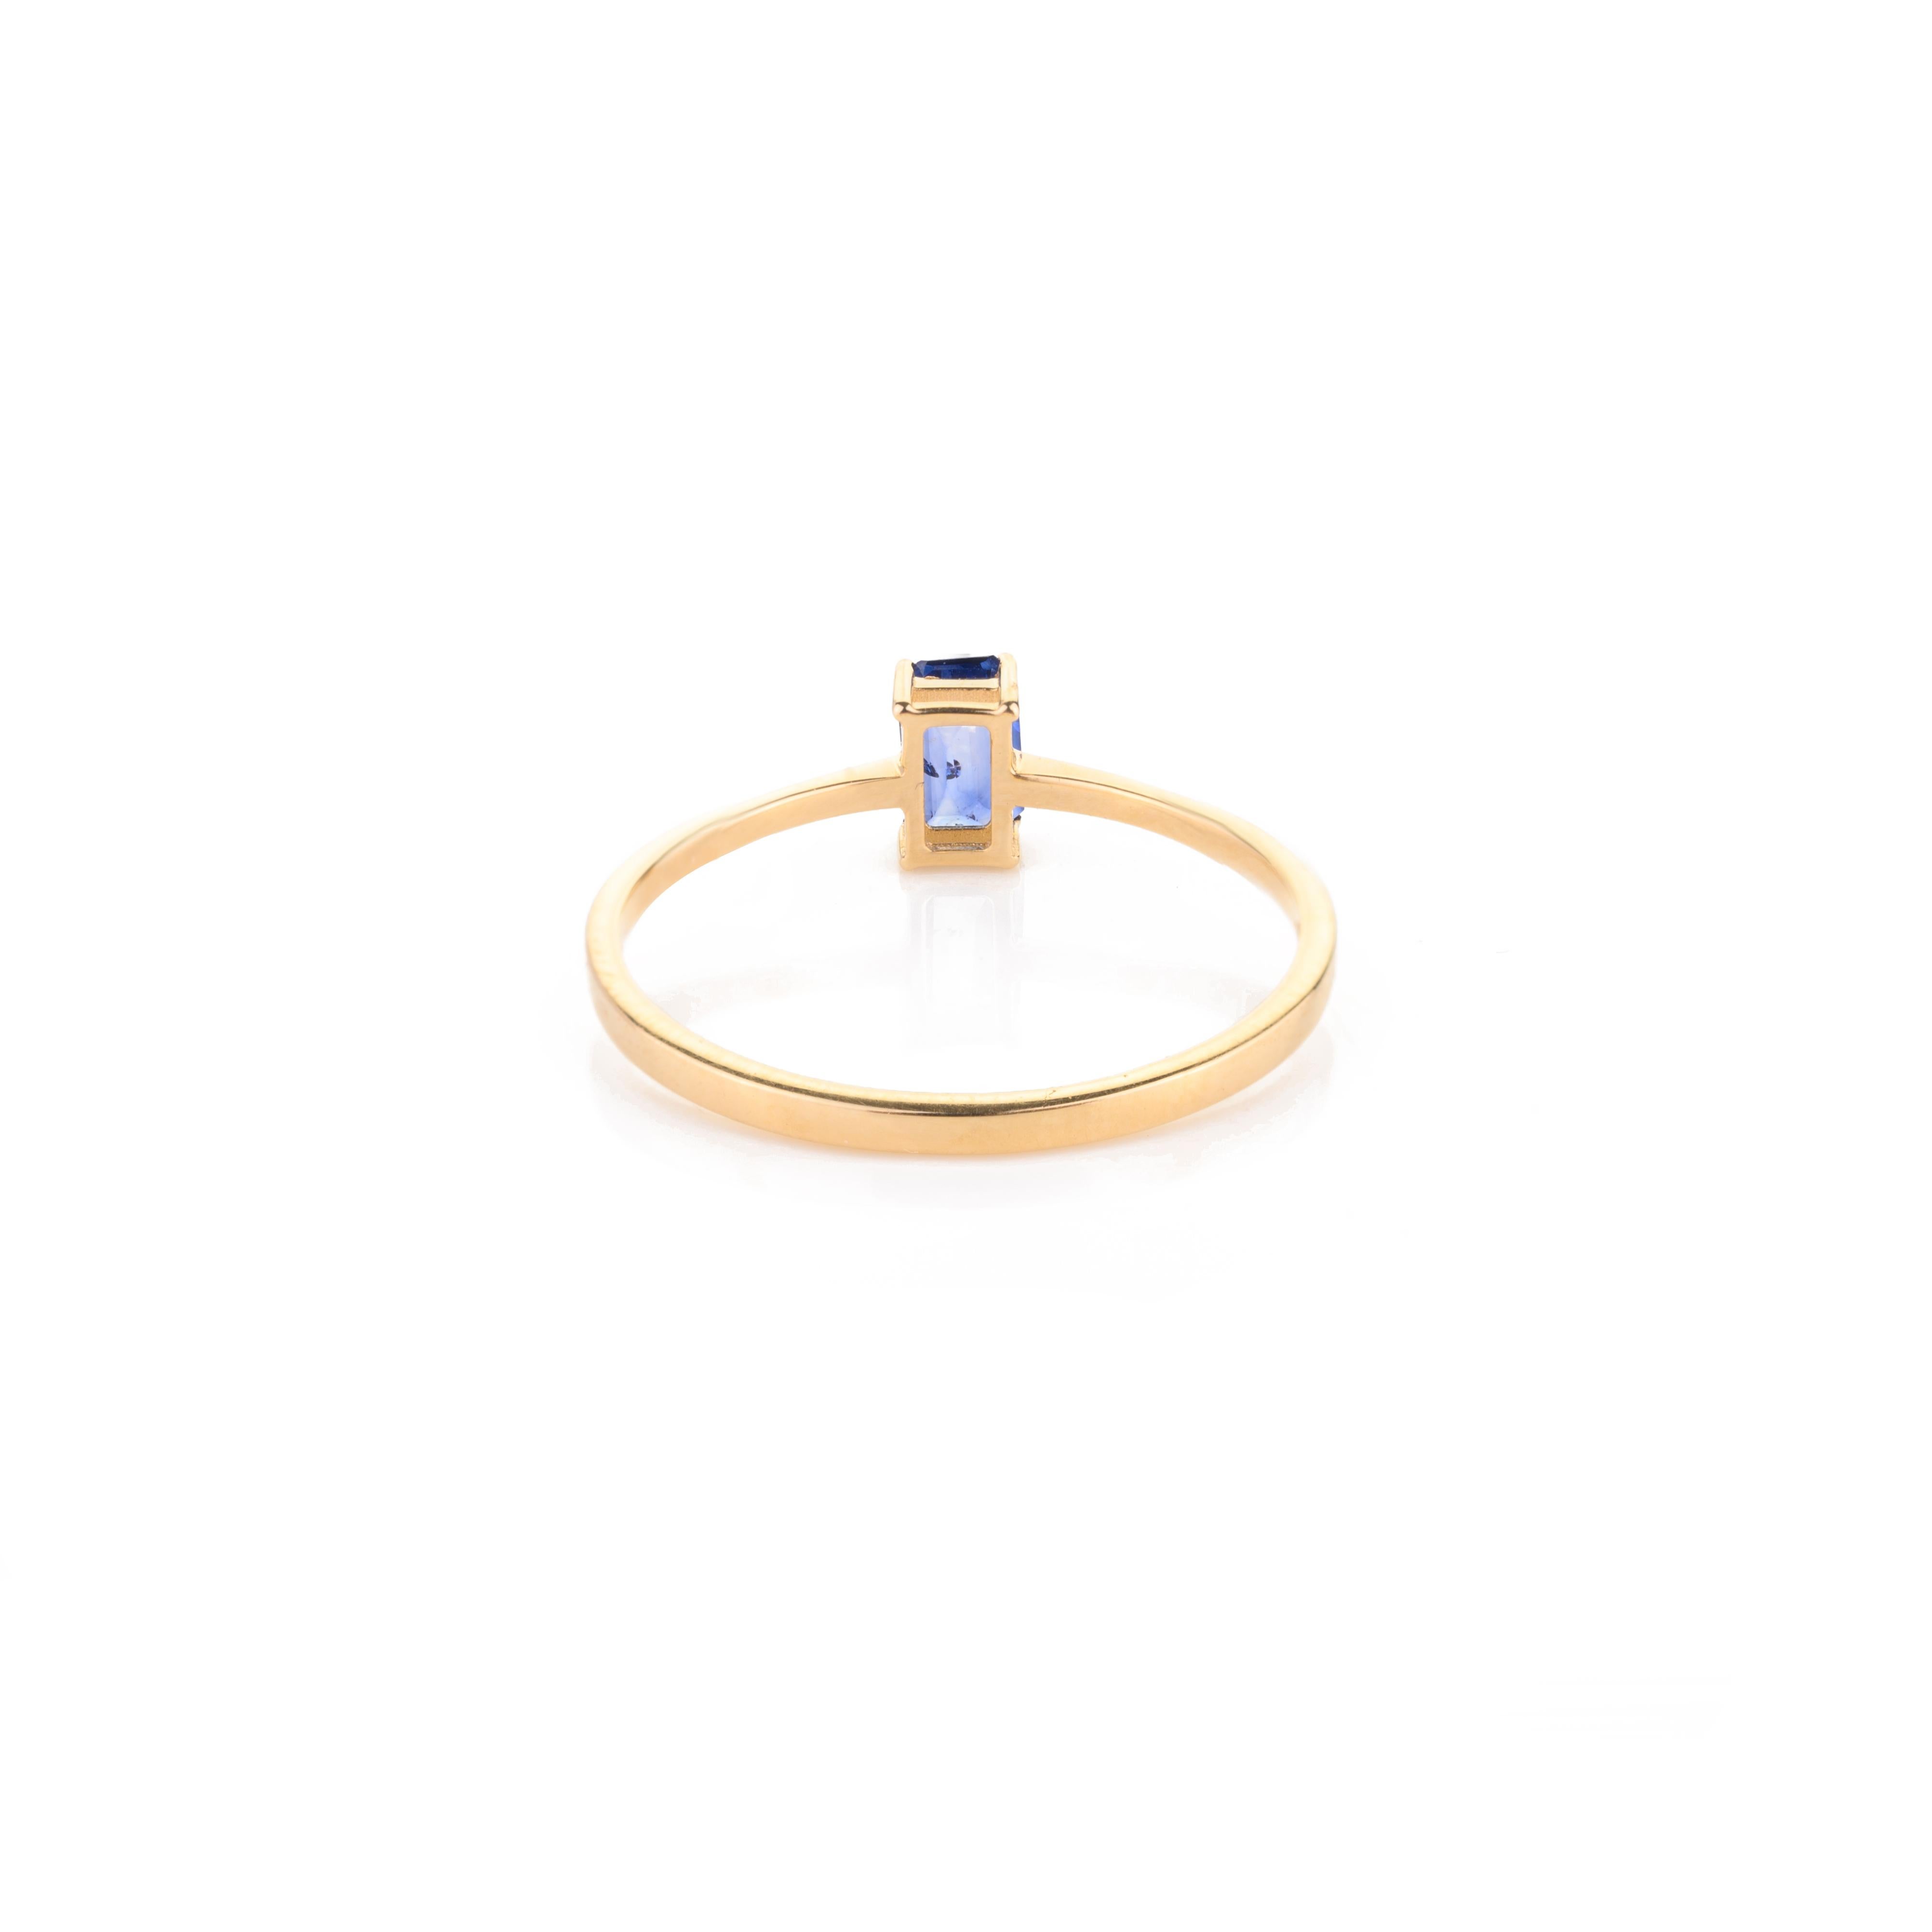 For Sale:  Minimal Baguette Cut Blue Sapphire Ring in 18k Solid Yellow Gold 5